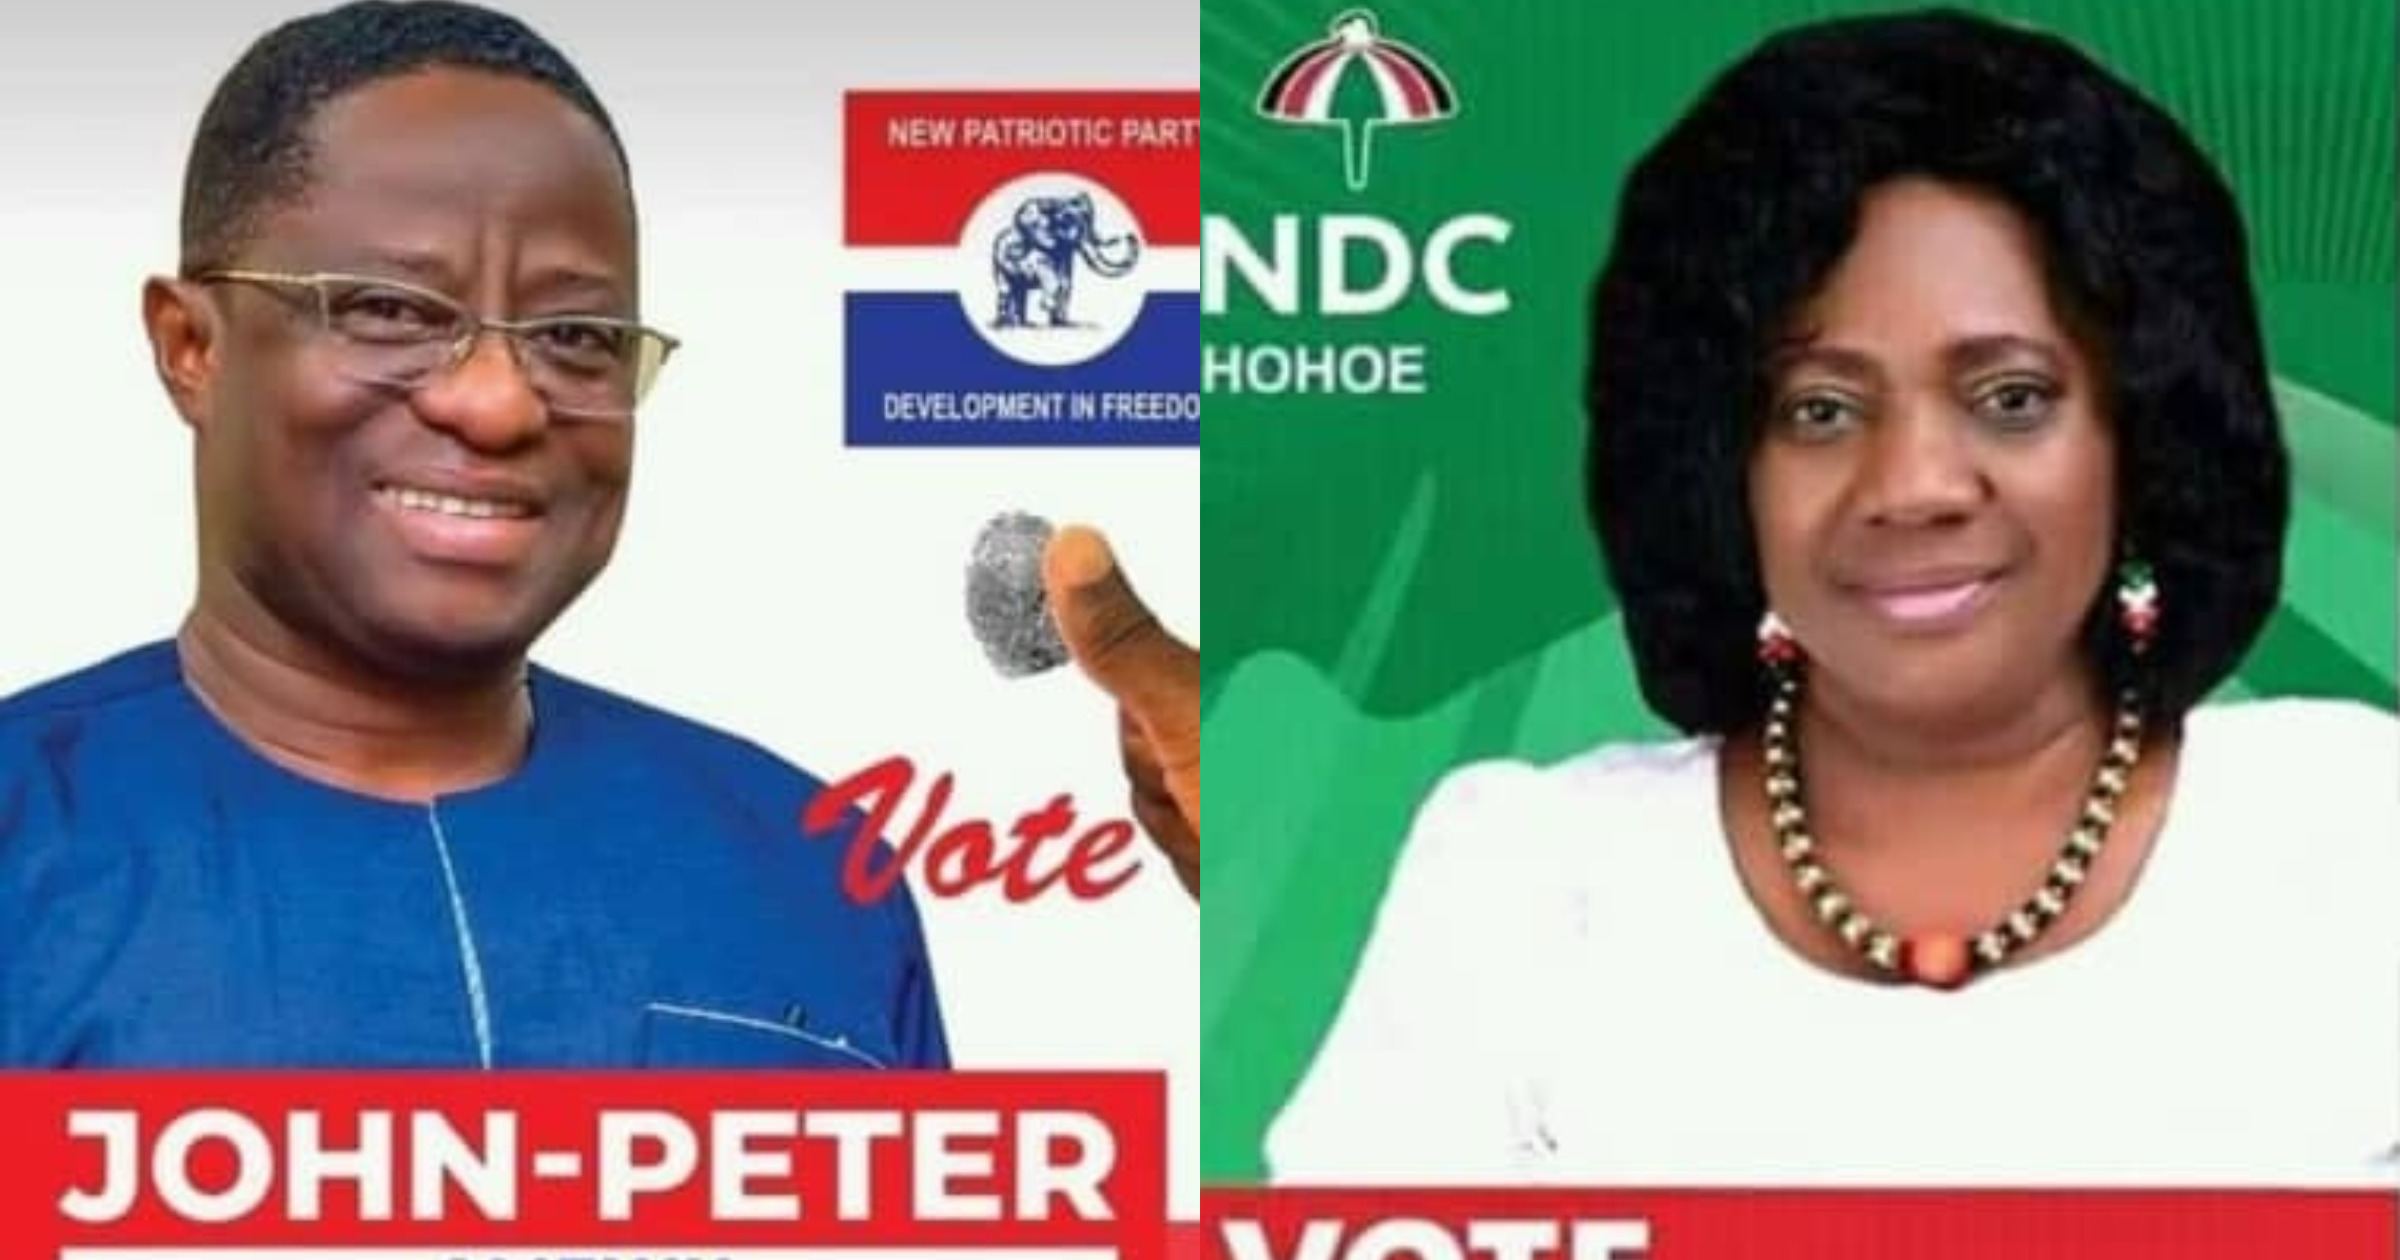 Election 2020: NPP's John Peter Amewu takes early lead in Hohoe Constituency